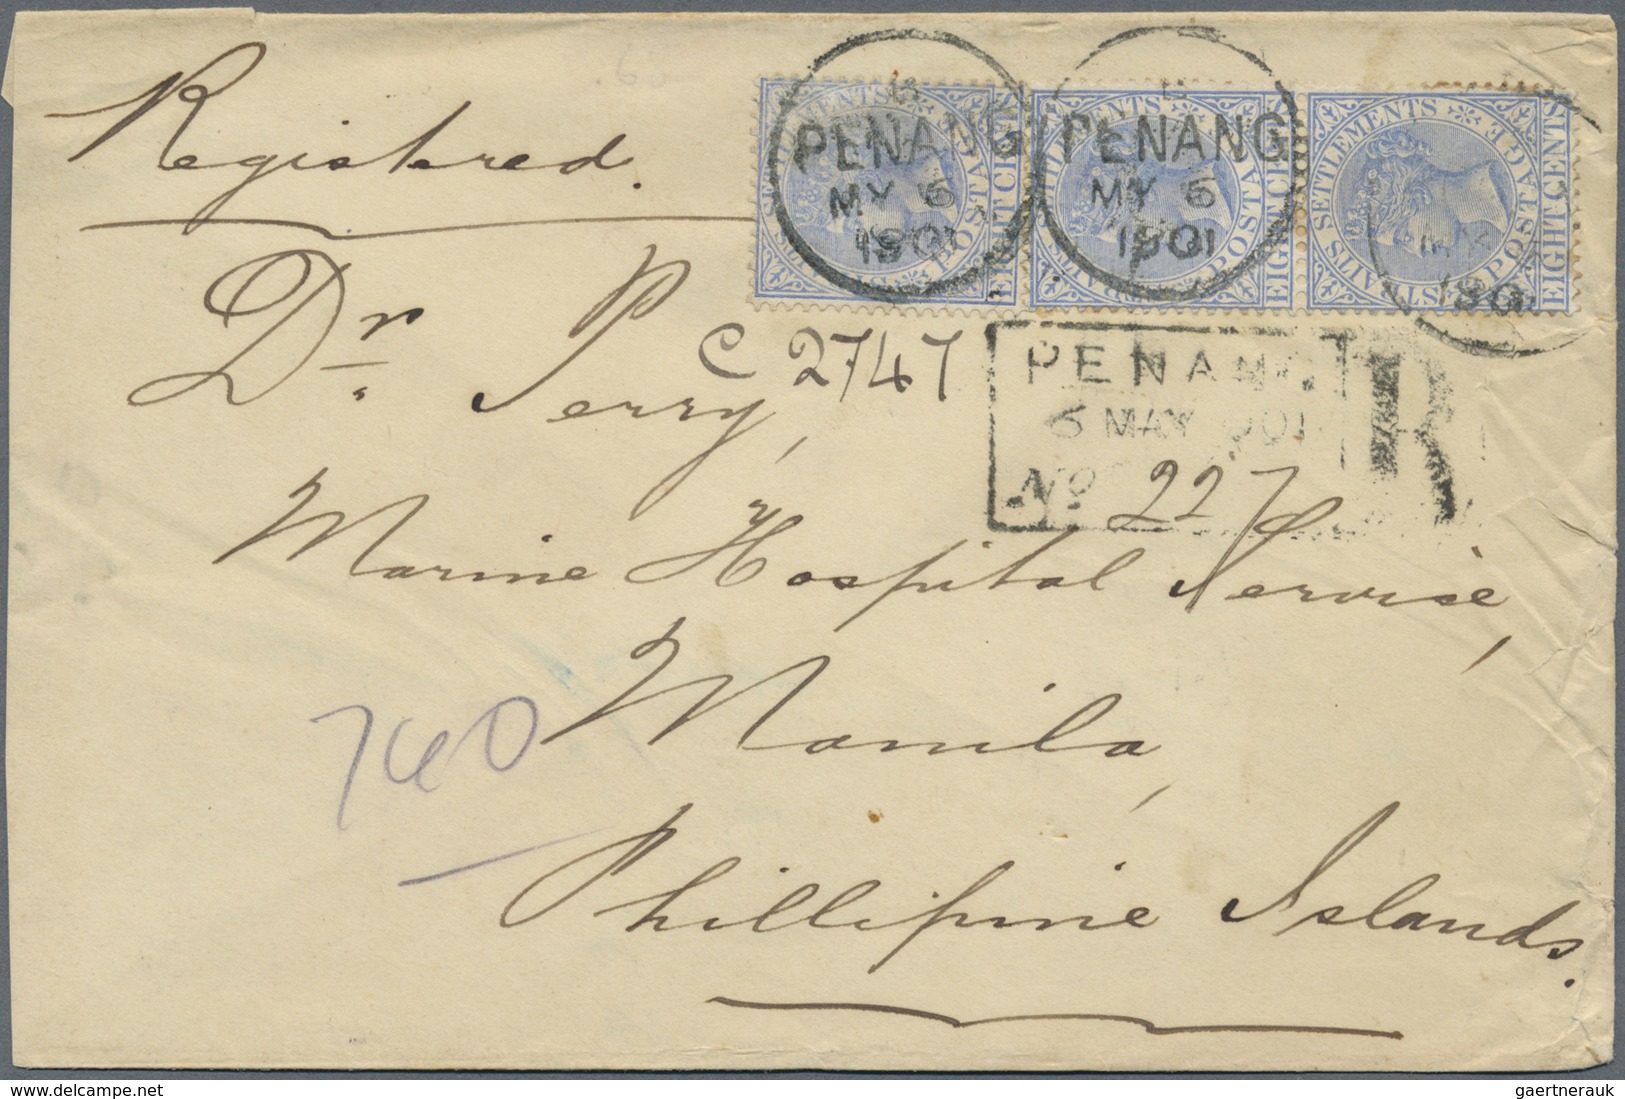 Br Malaiische Staaten - Penang: 1901 Registered Cover To Manila, Philippine Islands Franked 1892-99 5c. - Penang